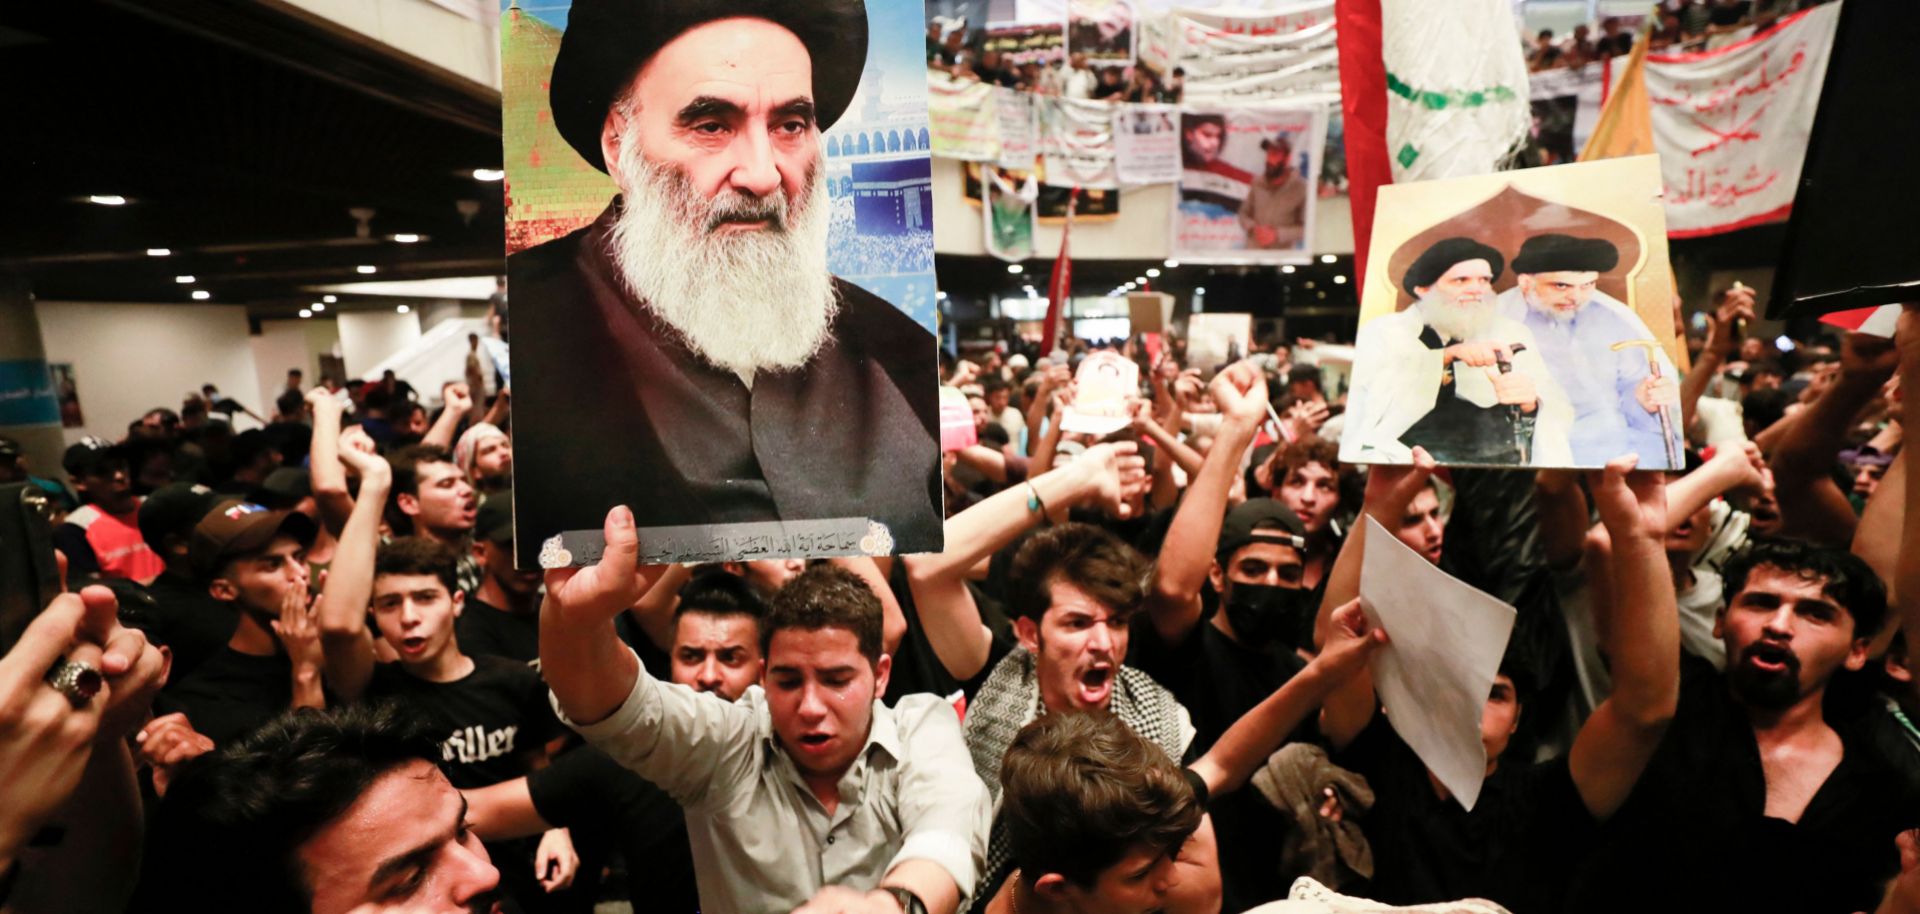 Supporters of Iraqi cleric Muqtada al-Sadr protest the nominee for prime minister from a rival Shiite faction Aug. 3, 2022, in Baghdad's high-security Green Zone.